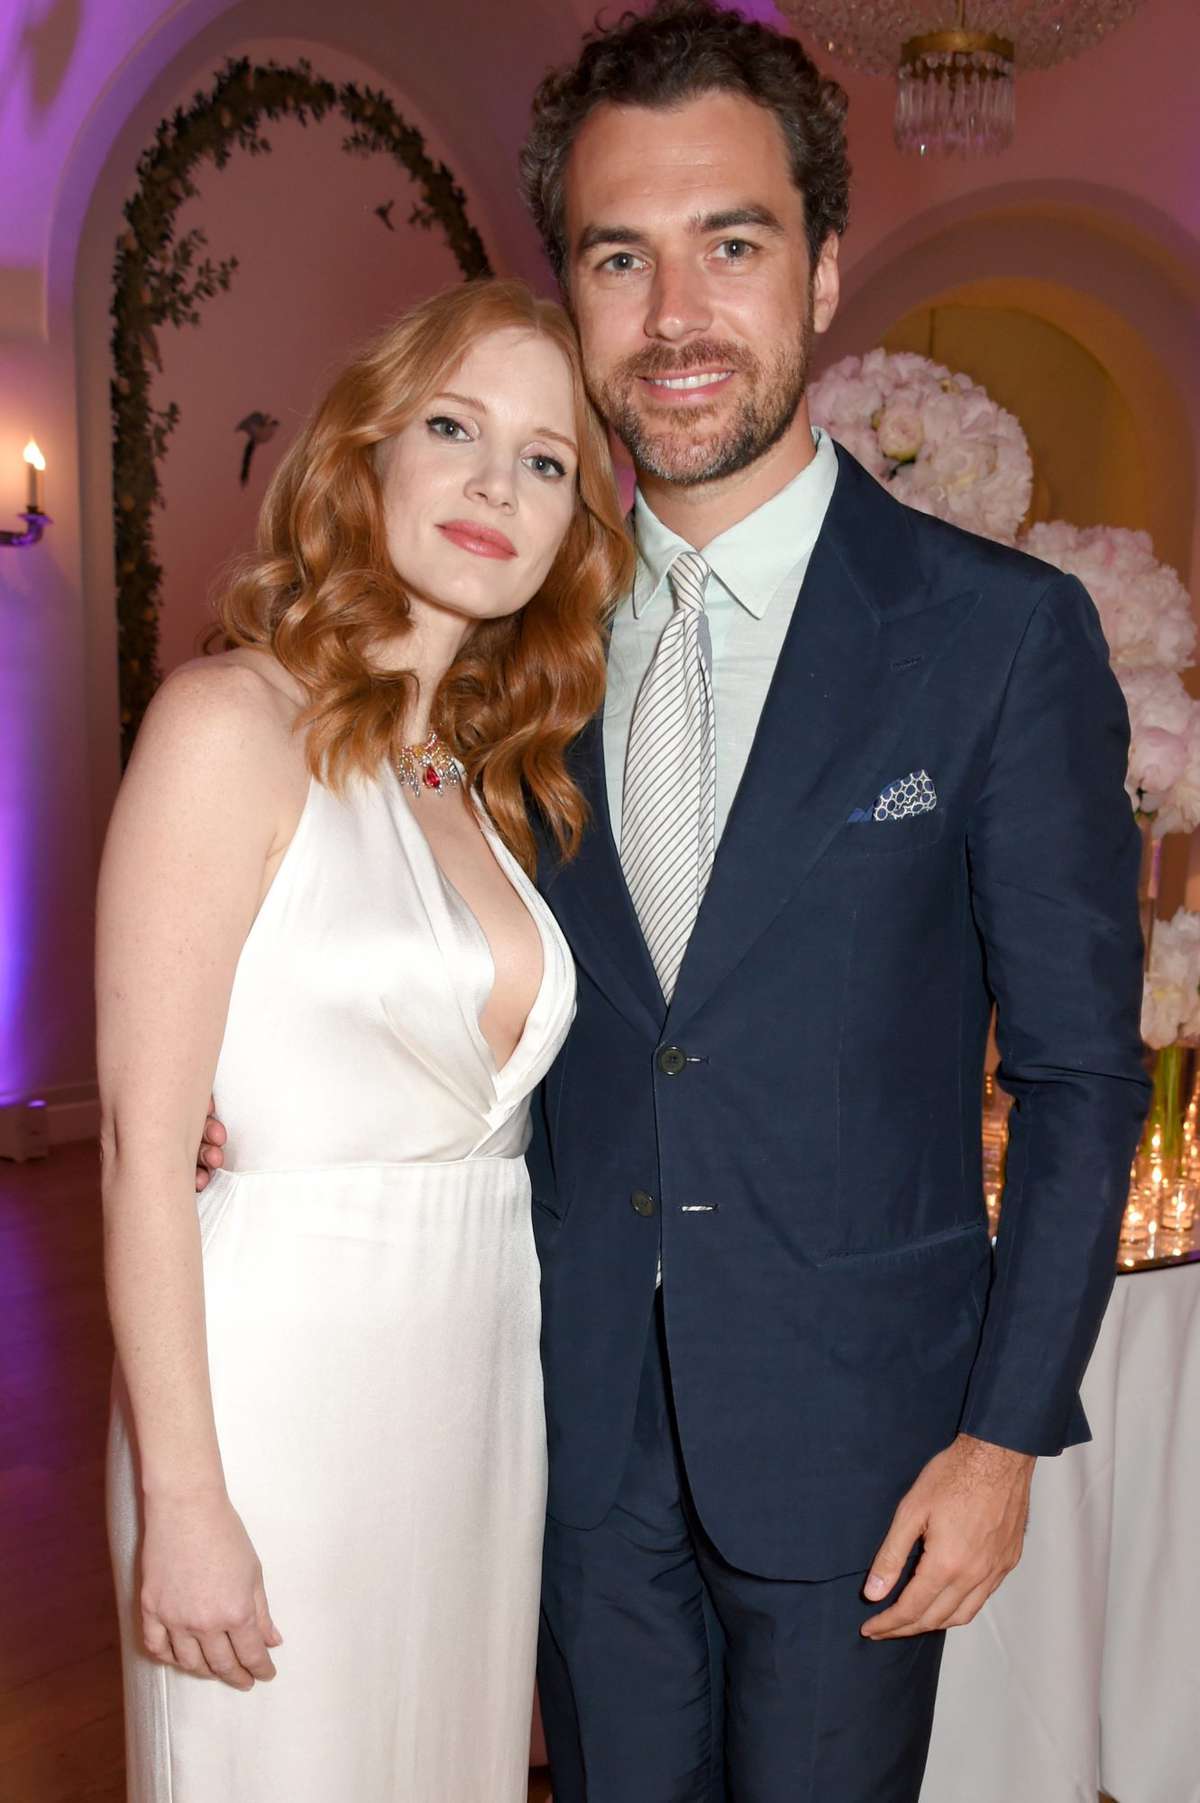 Jessica Chastain and husband lead